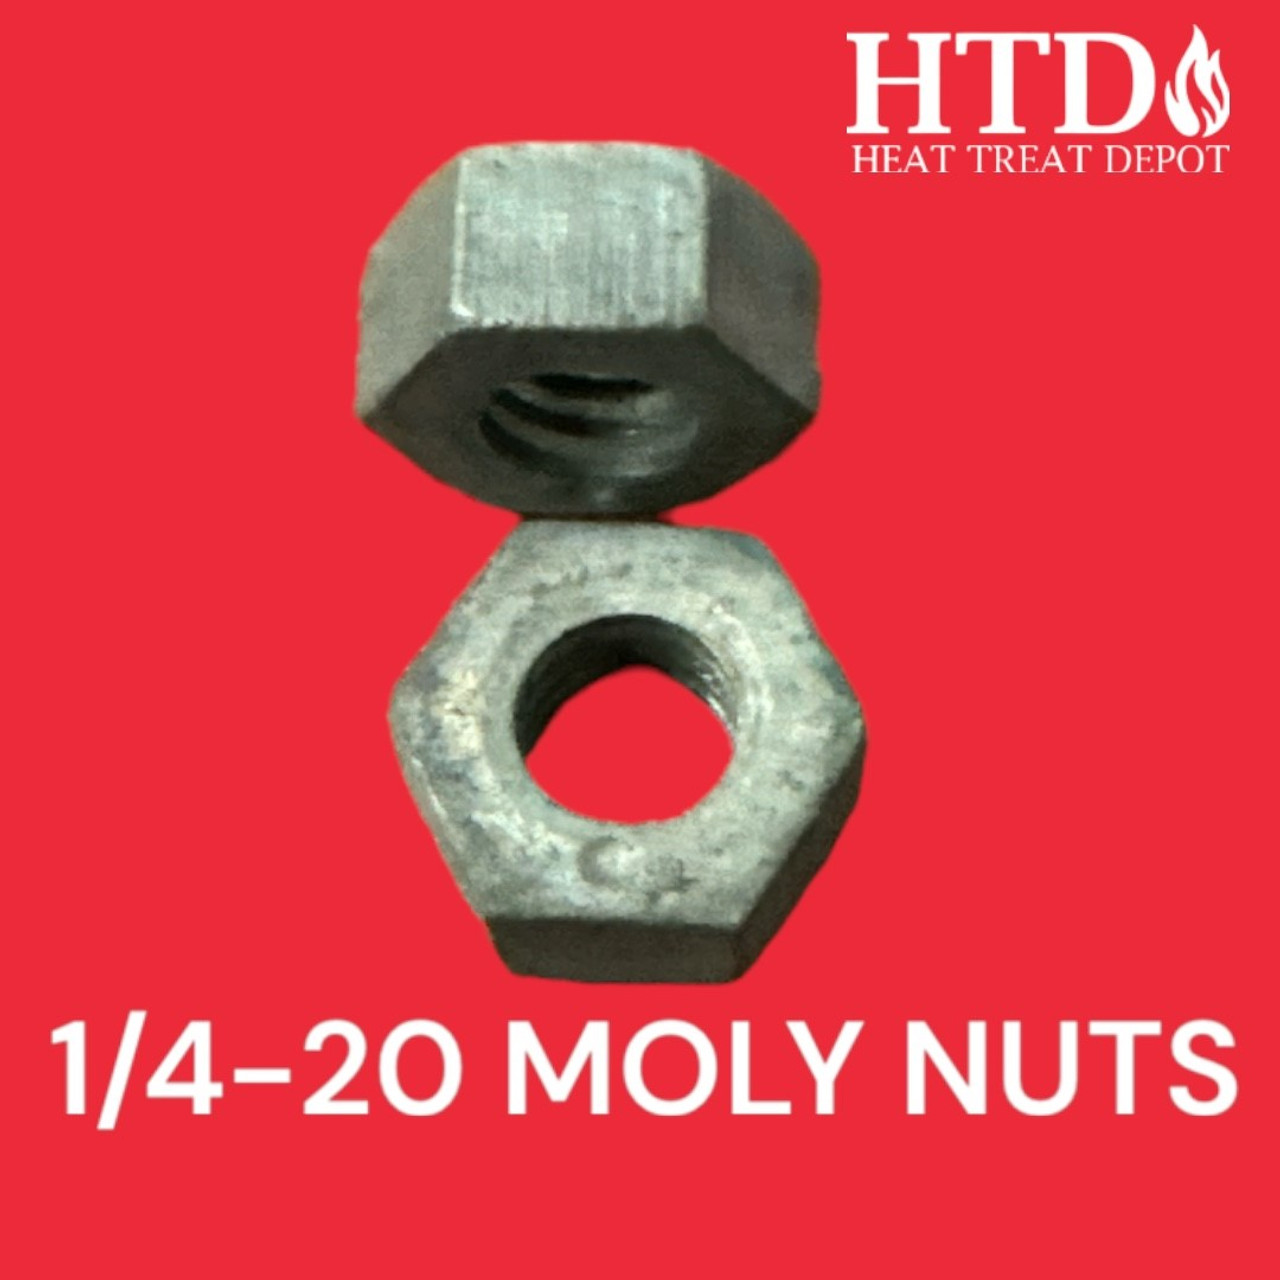 Moly Nuts 1/4-20 